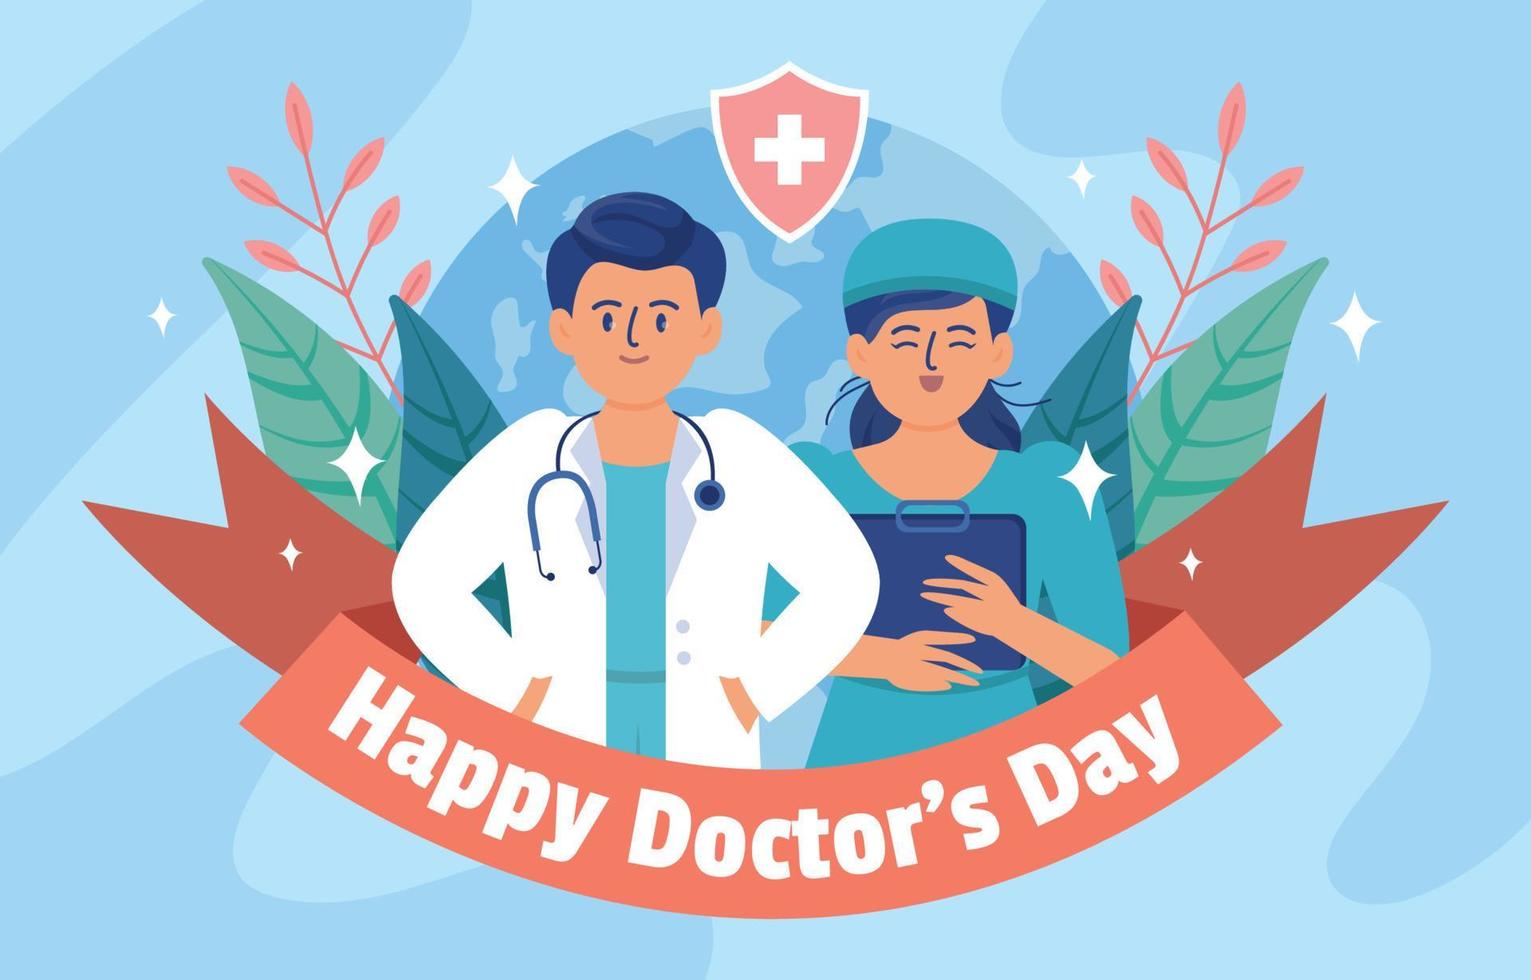 Happy Doctor's Day Greetings Template vector